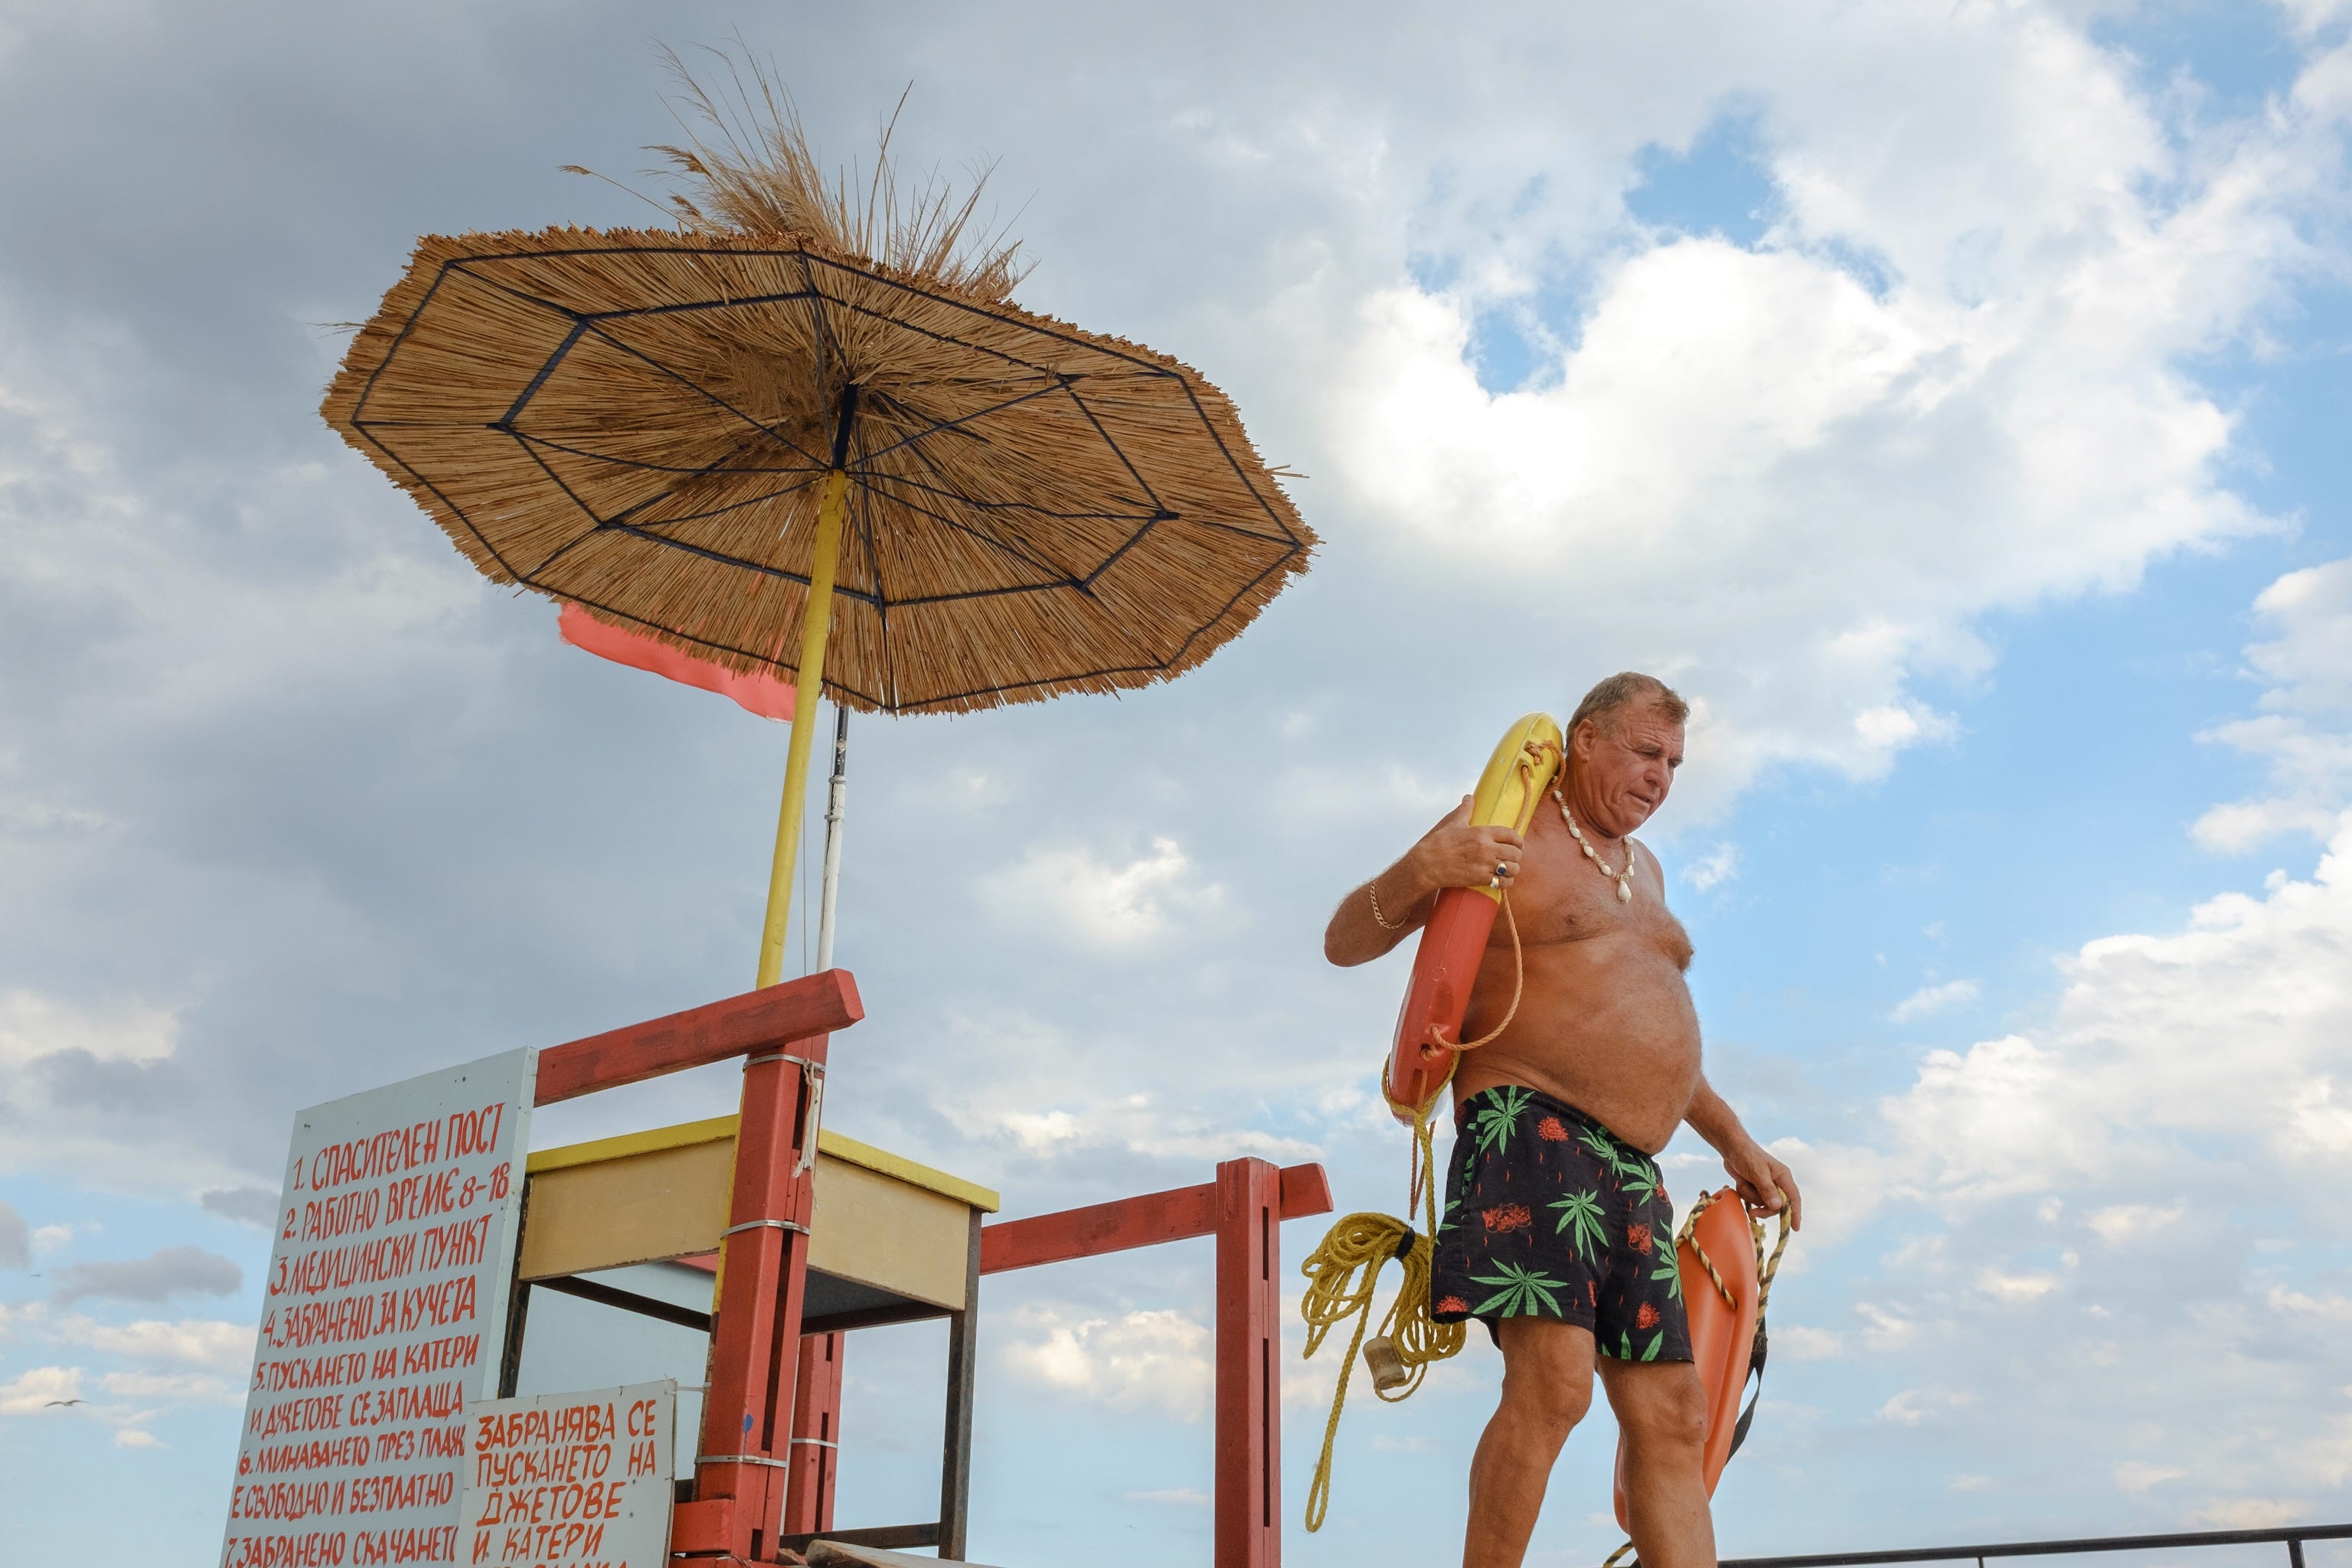 The local life guard, complete with beer belly, carries life preservers.